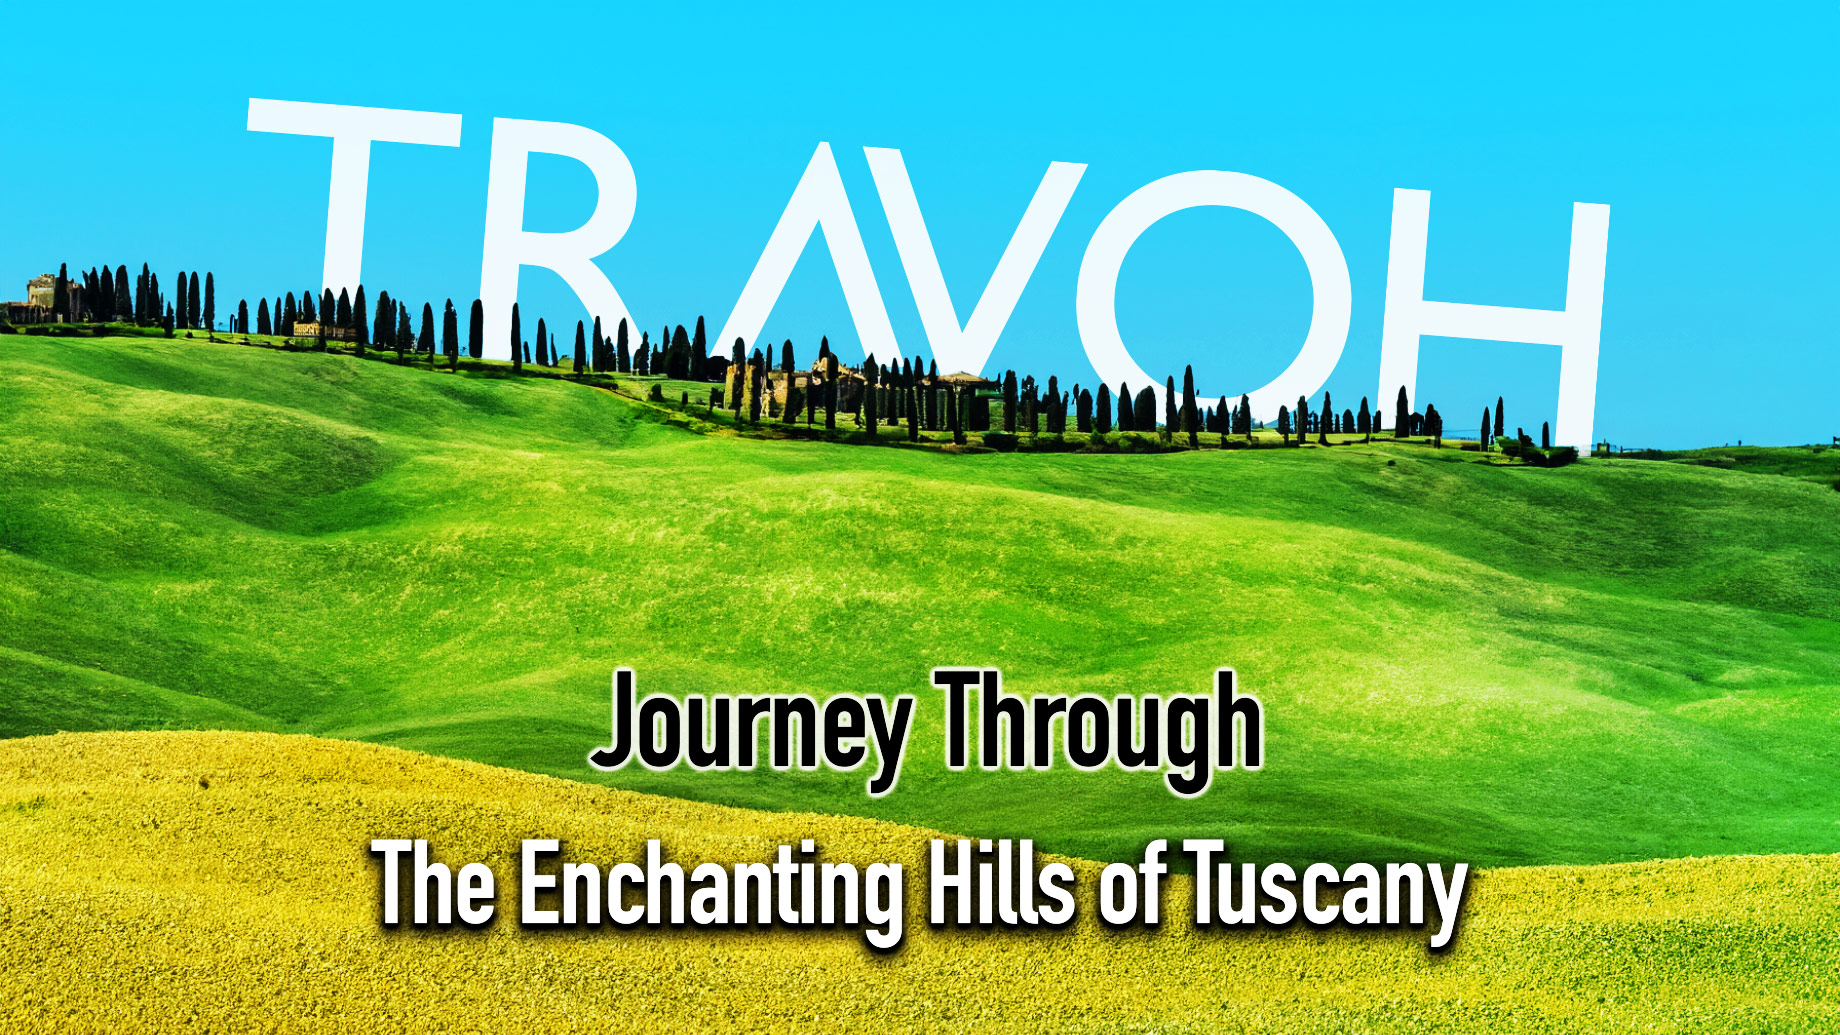 Rolling Elegance - A Journey Through the Enchanting Hills of Tuscany